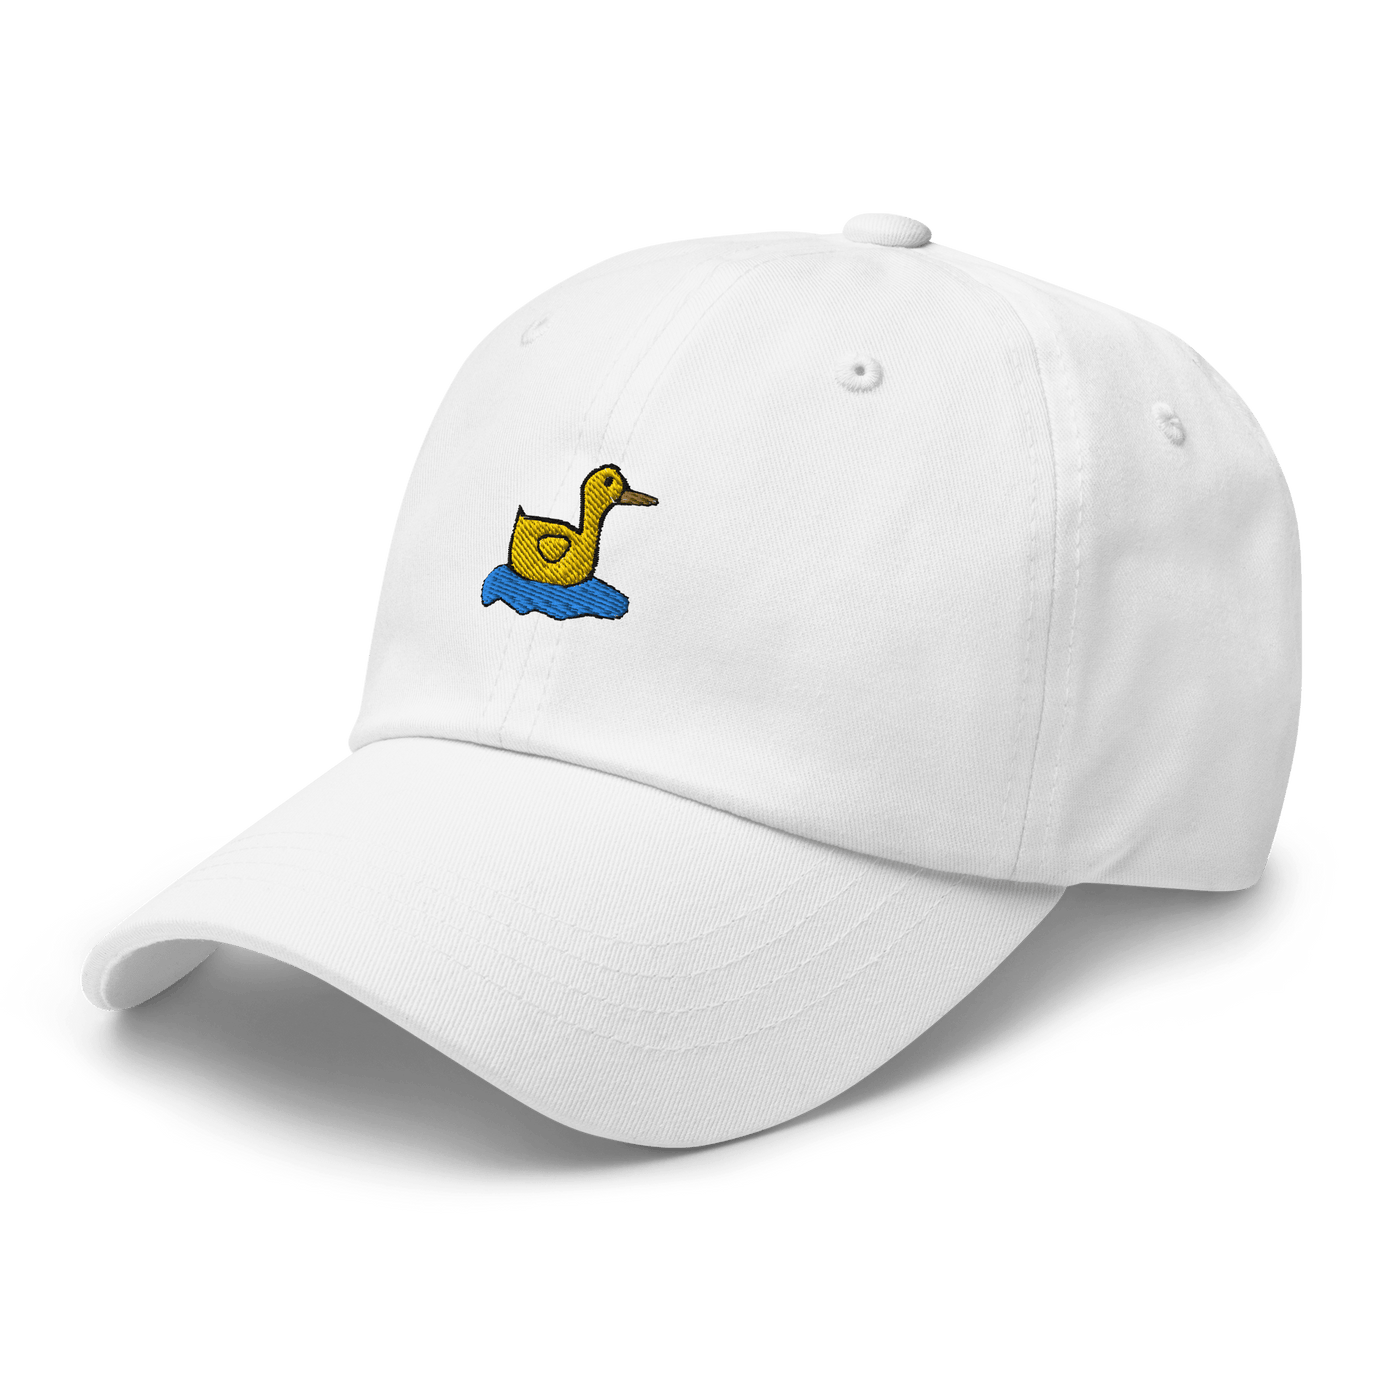 Lonely Duck Dad hat - White - - Just Another Cap Store